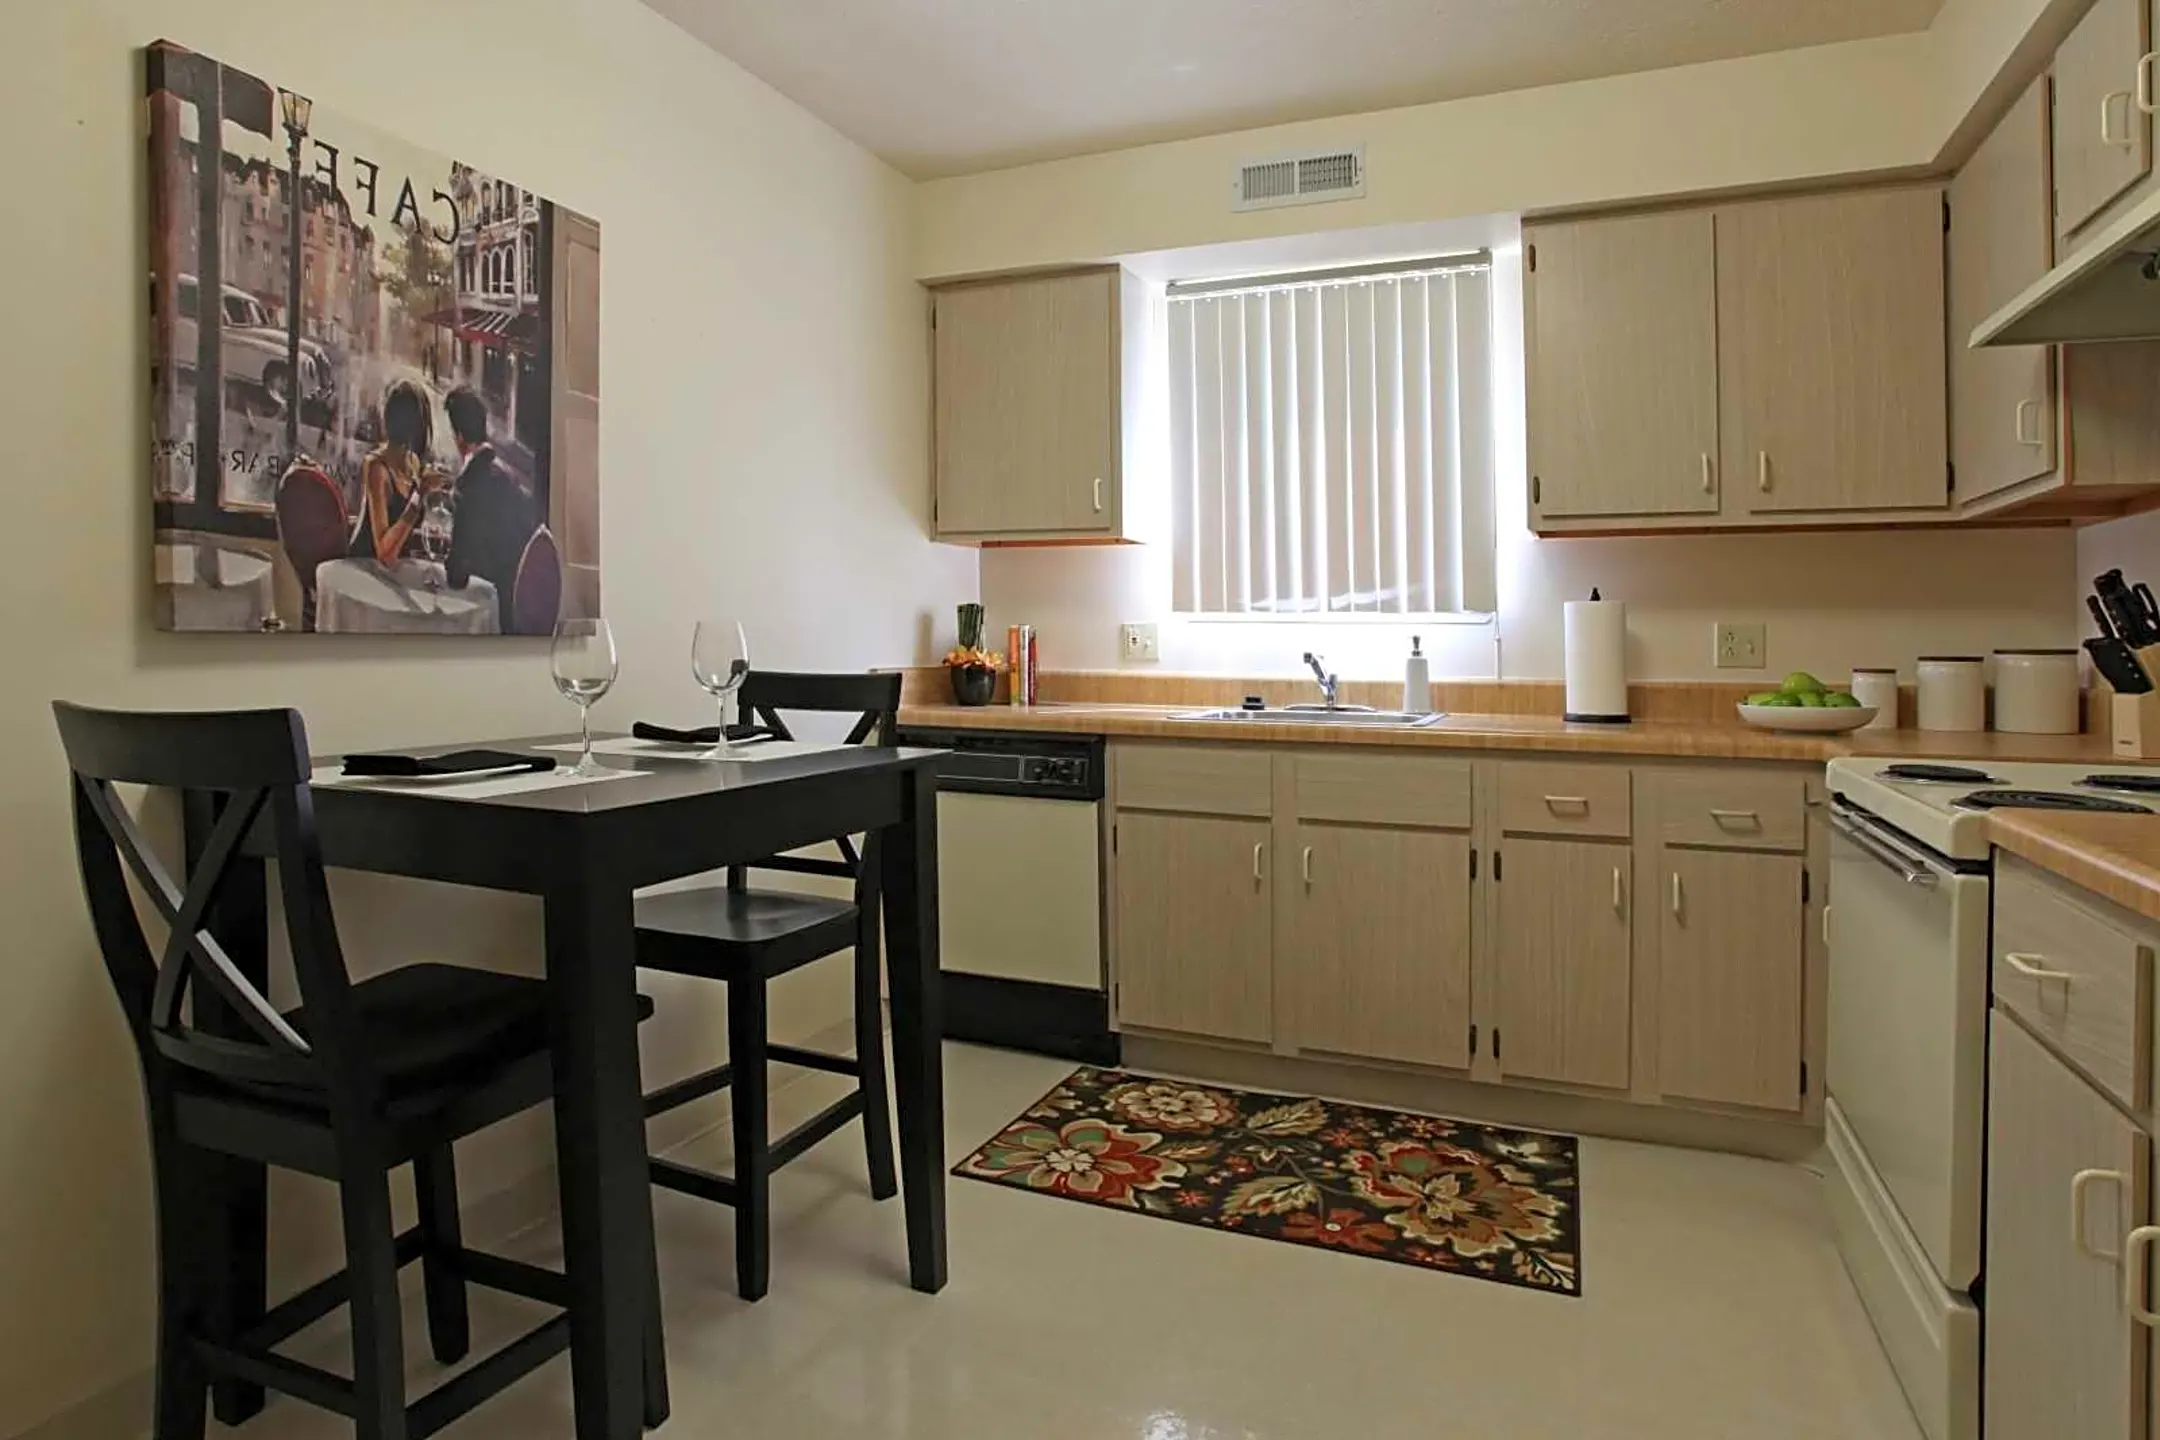 Kitchen - Foxmoor Apartments - Cleveland, OH